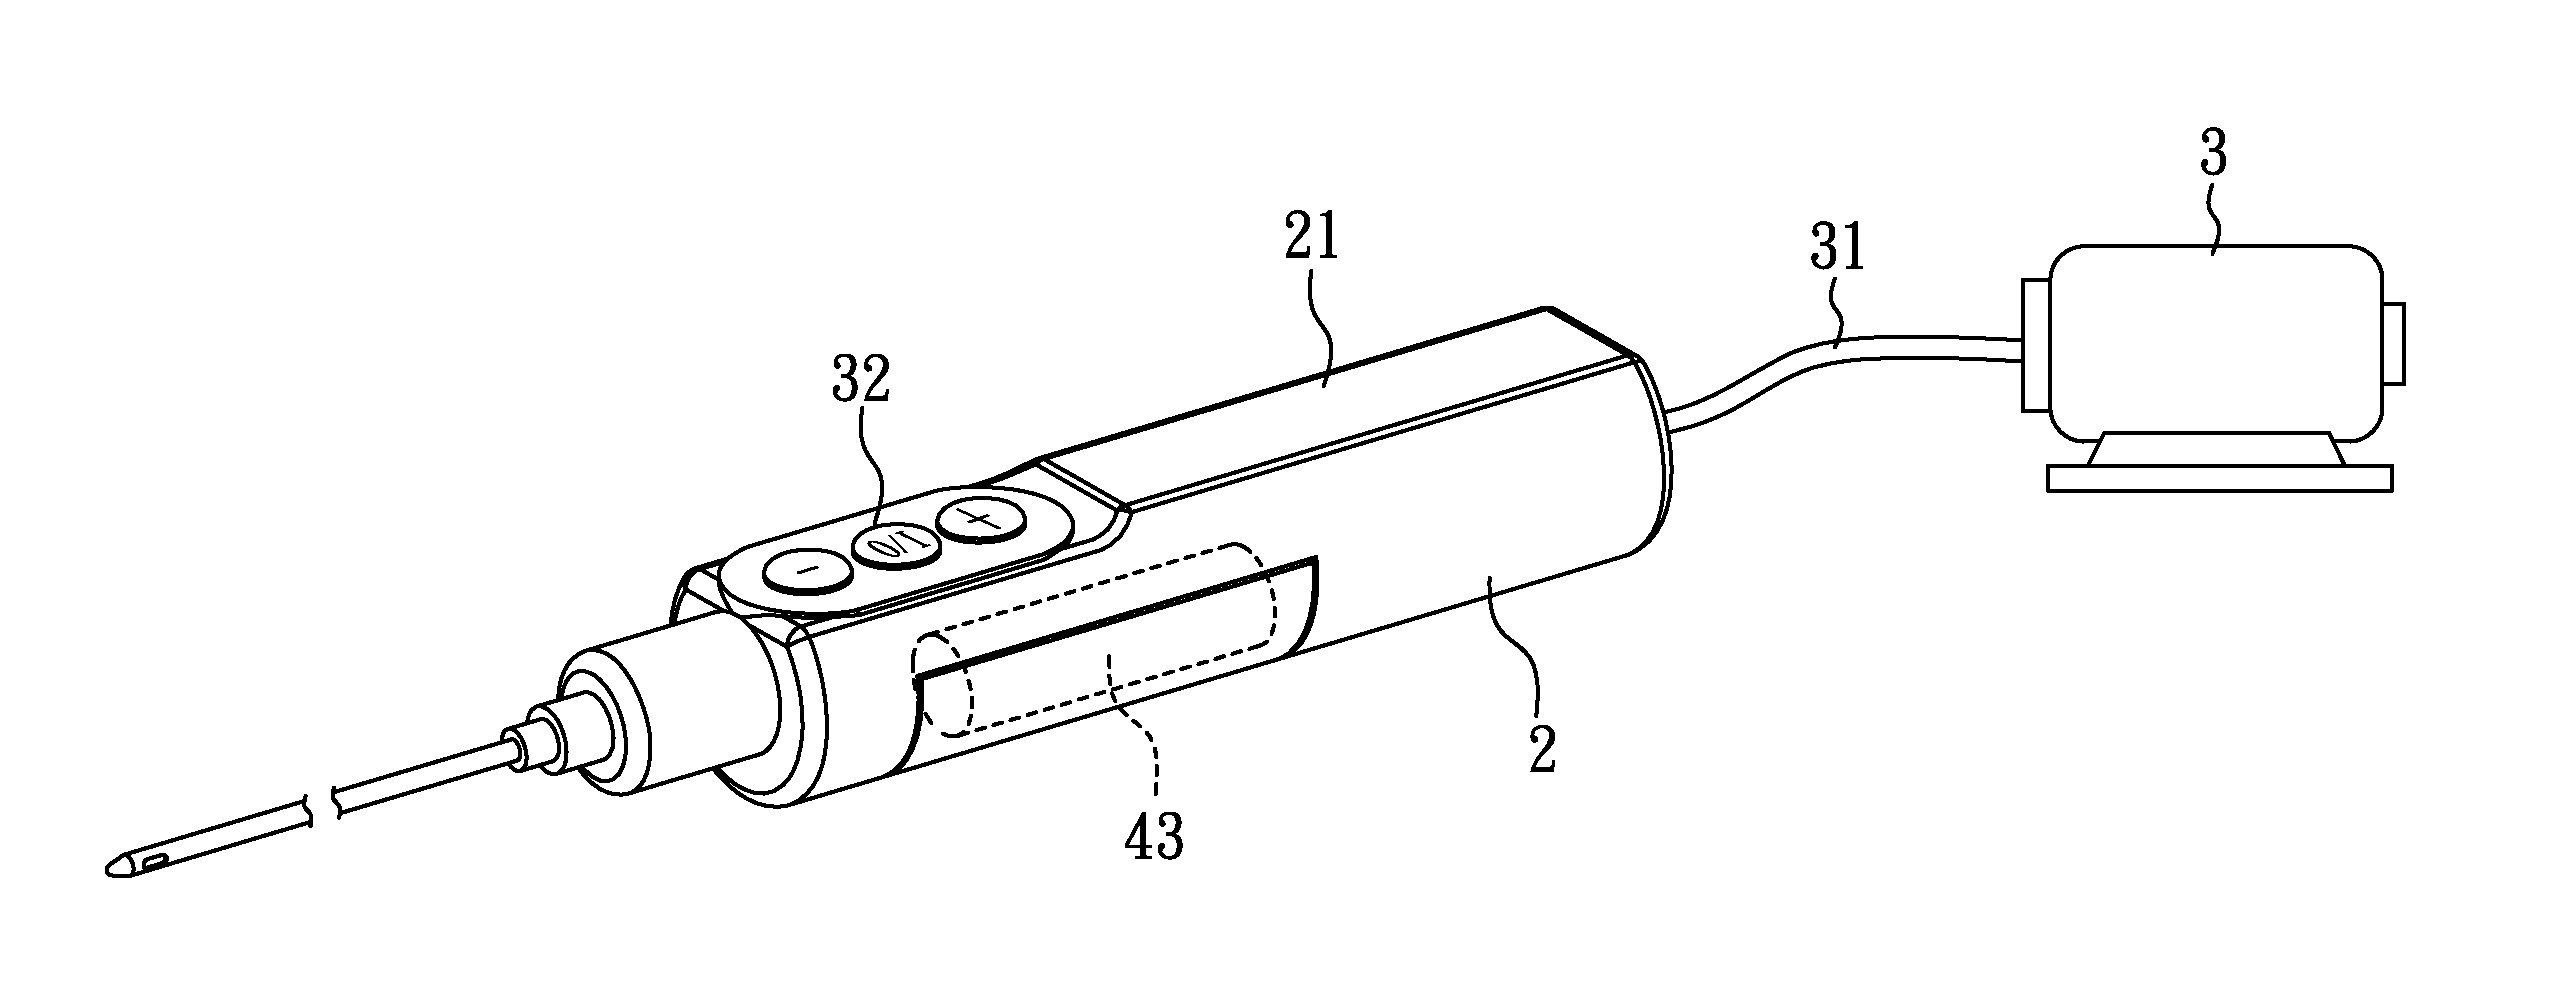 Automatic Fat graft injection device with Navigation System